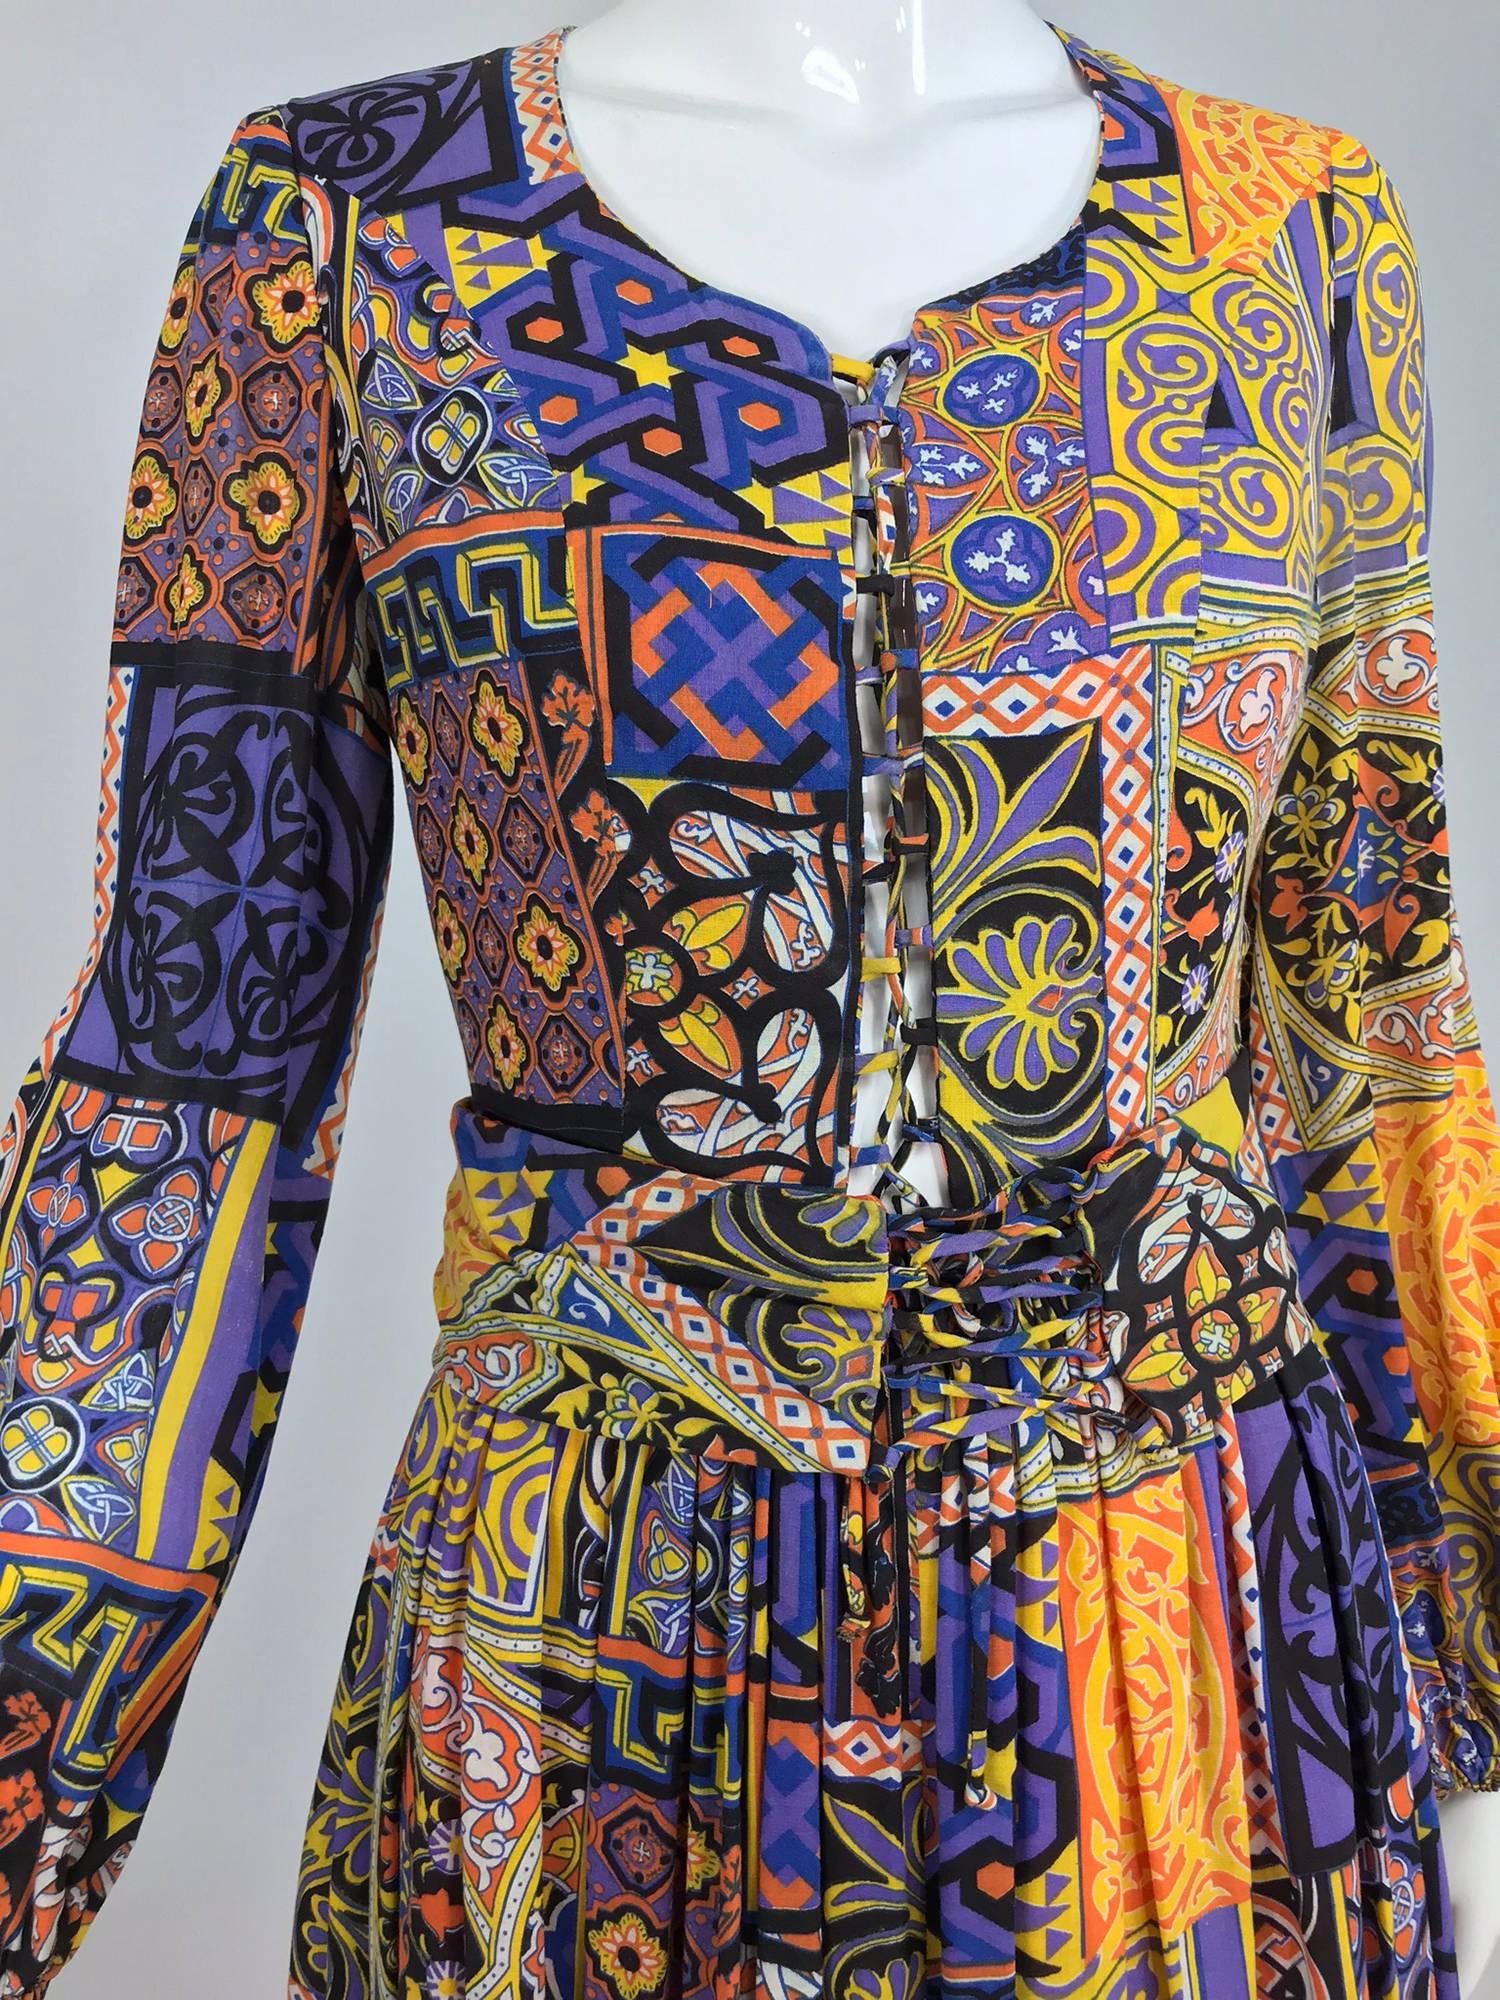 Moorish mosaic cotton print laced front bohemian dress from the 1960s. Beautiful print done in square blocks of geometric and floral designs in purples, yellows, oranges, blacks. The scoop neckline laces at the front, neck to waist, with self cords.